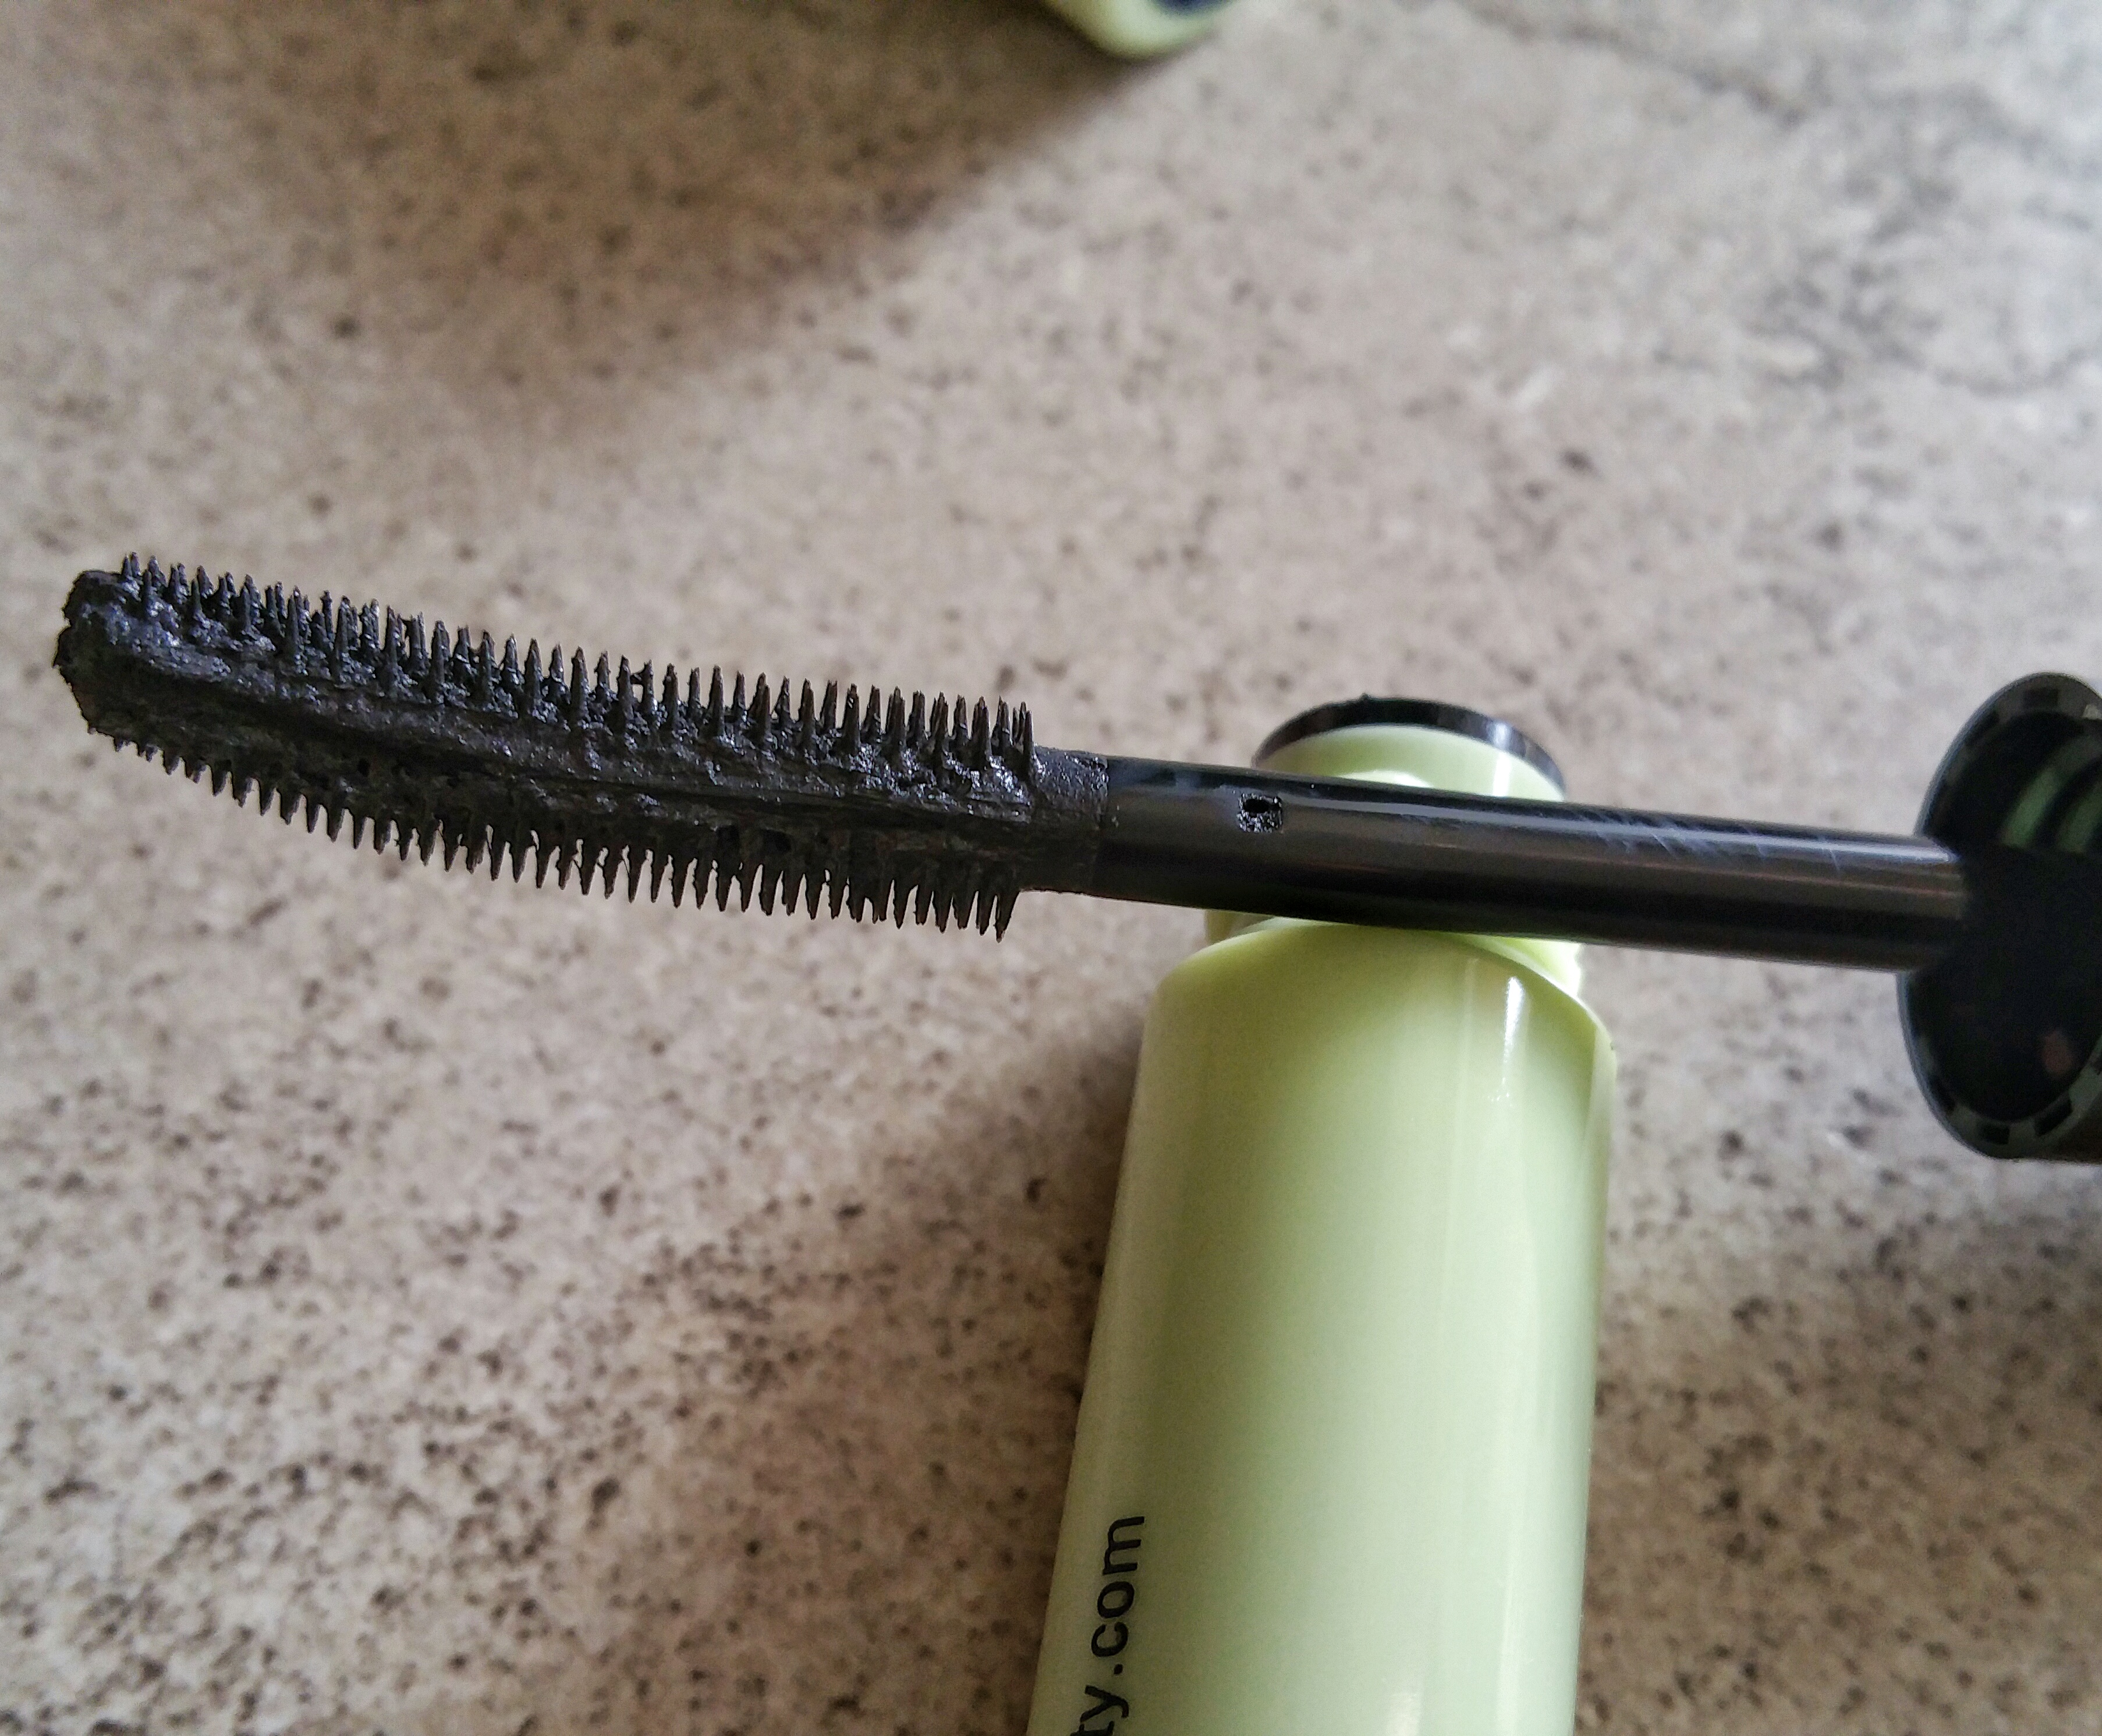 lashes, mascara, pixi beauty, pixi by petra, pixi perfection, layered lashes, lash primer, waterproof mascara, volumizing mascara, lengthening mascara, defining mascara, beauty, makeup, review, beauty review, swatches,